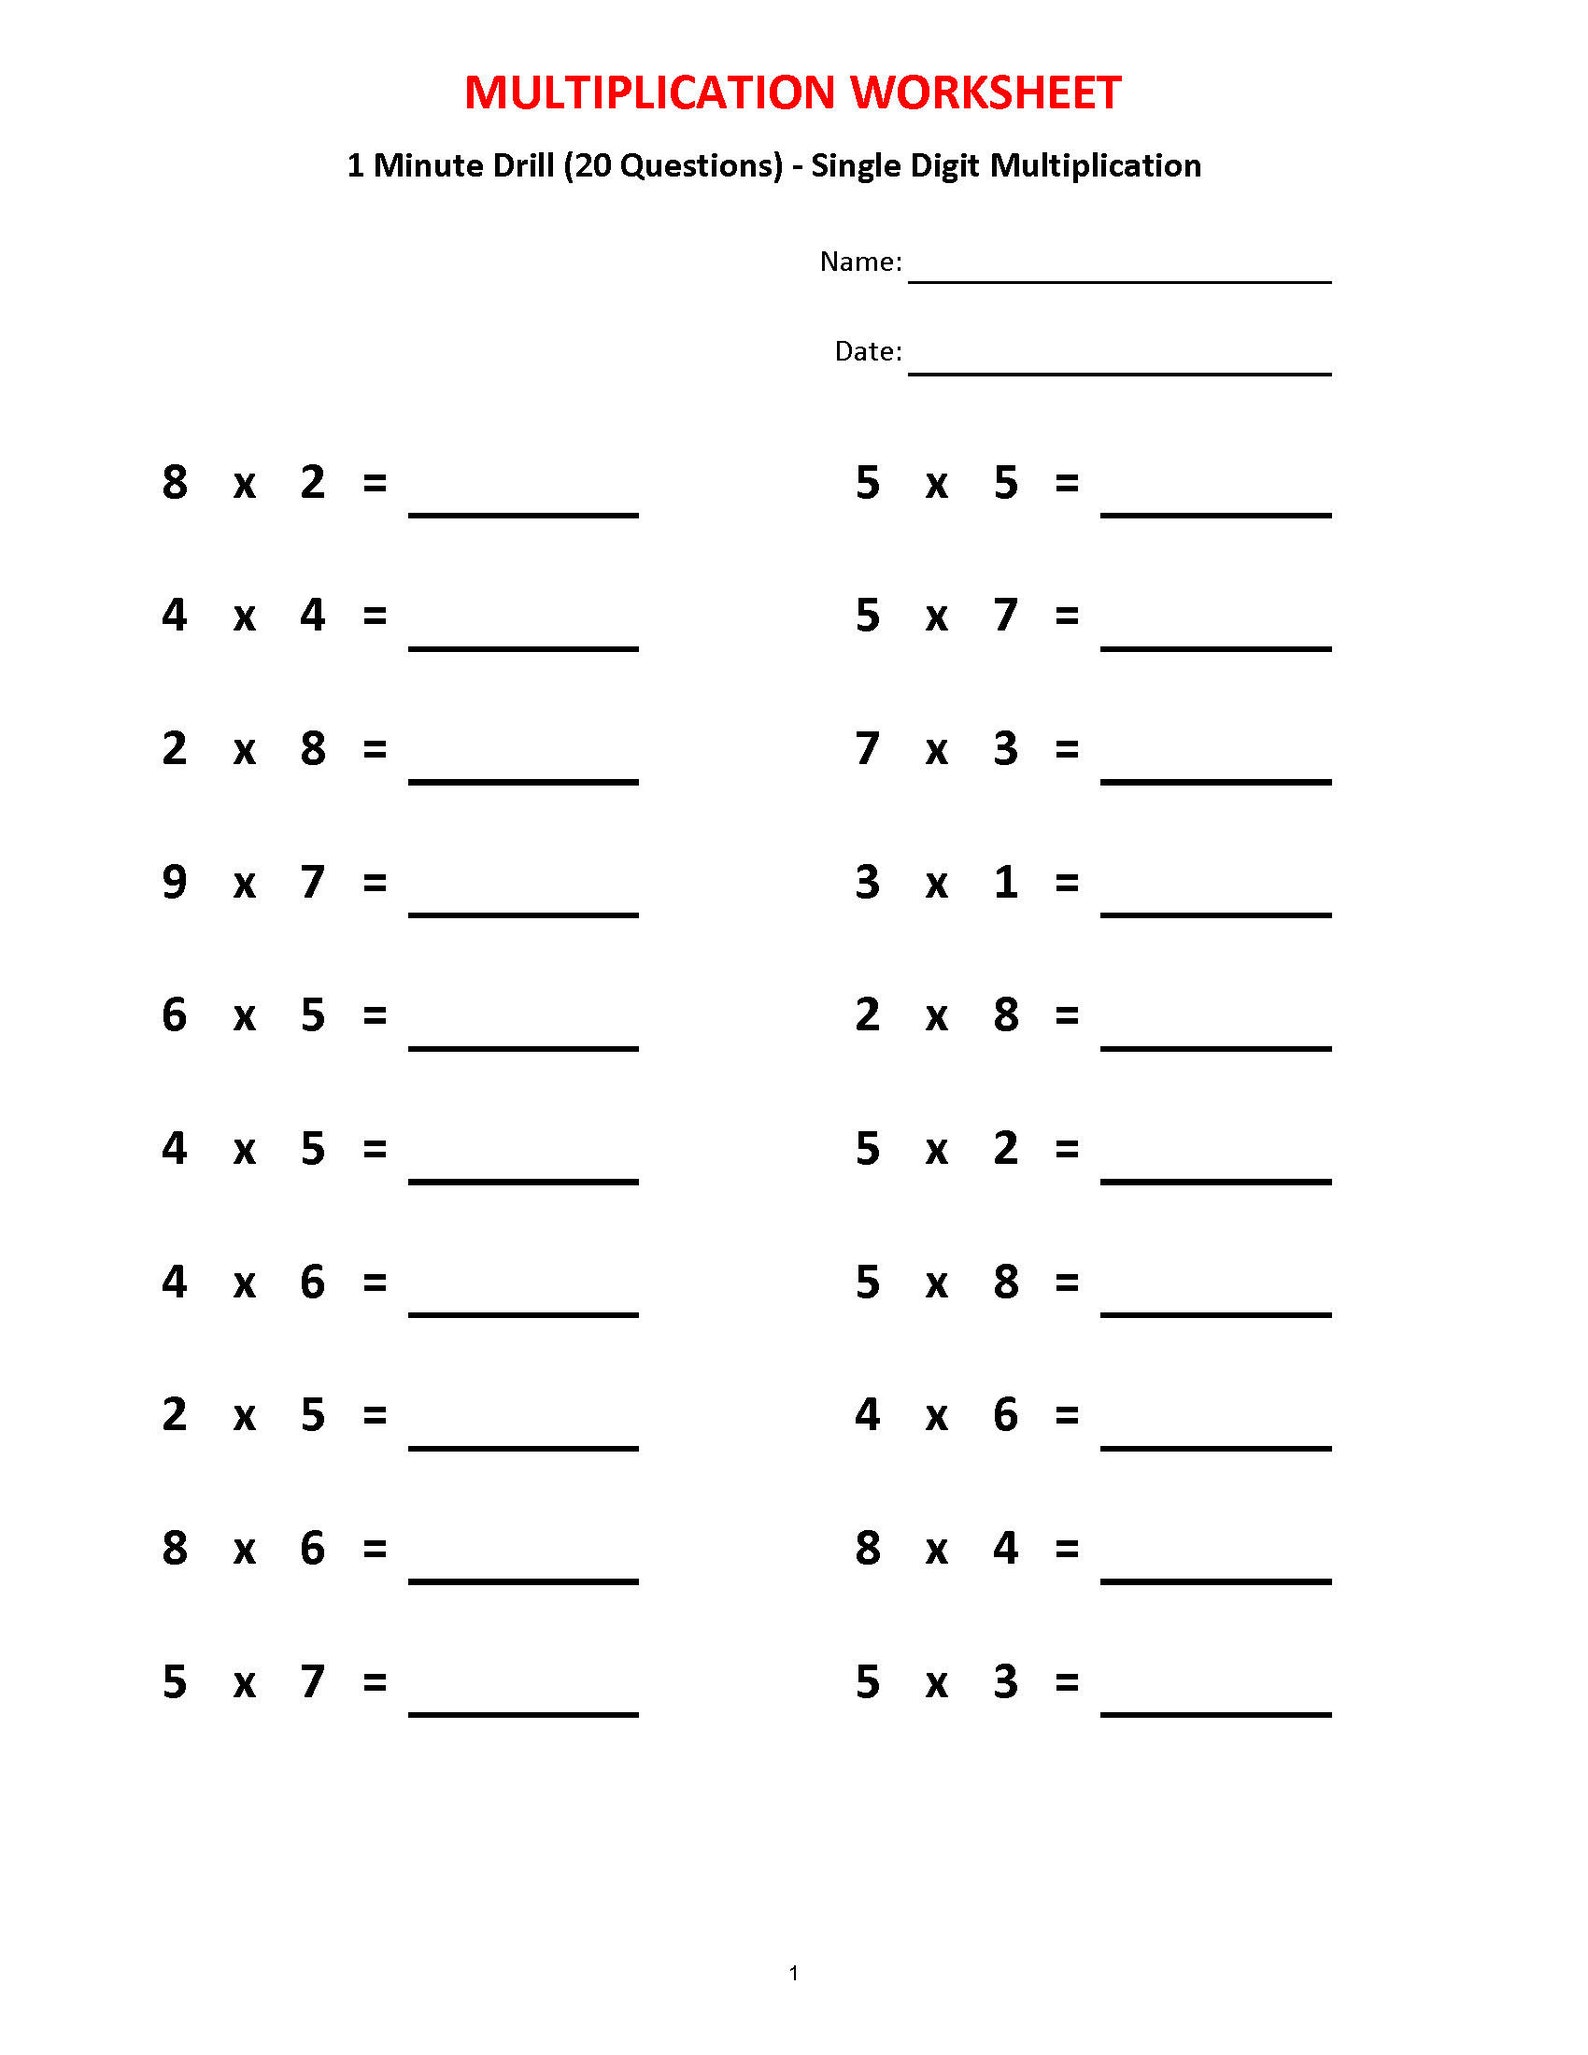 Multiplication 1 Minute Drill H 10 Math Worksheets With Answers pdf 